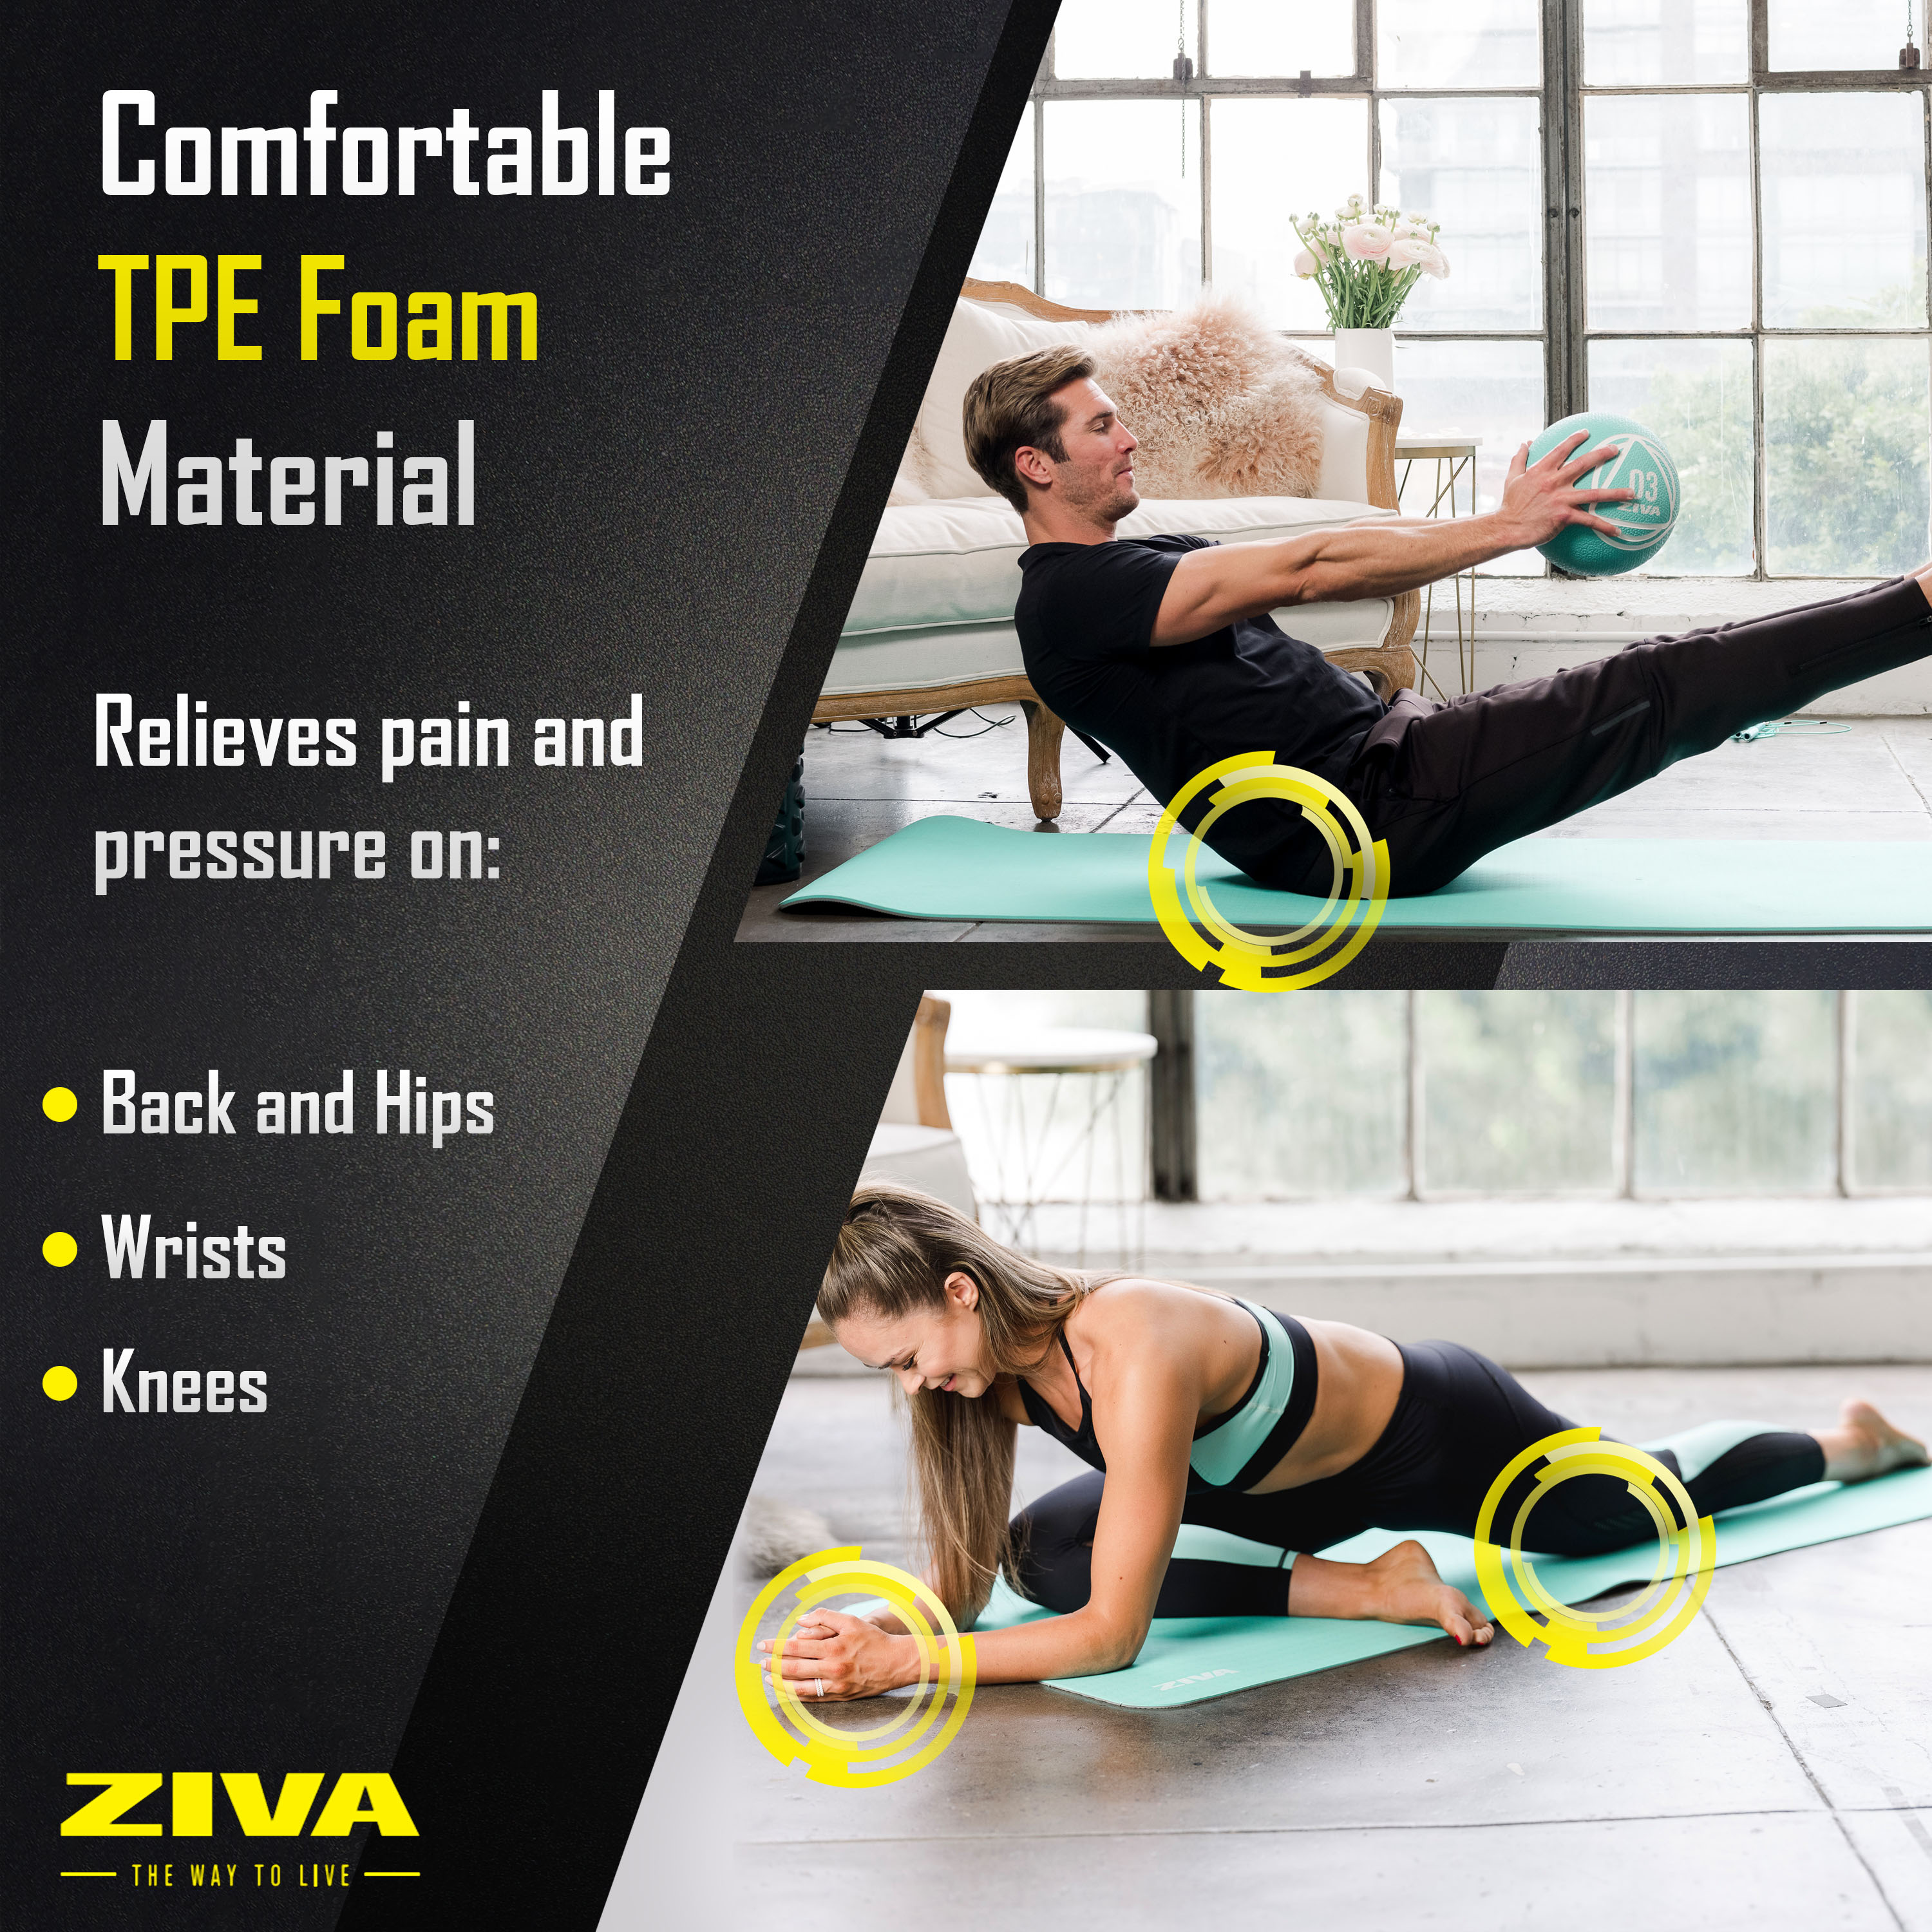 Comfortable TPE foam material. Relieves pain and press on on: back and hips, wrists, knees.